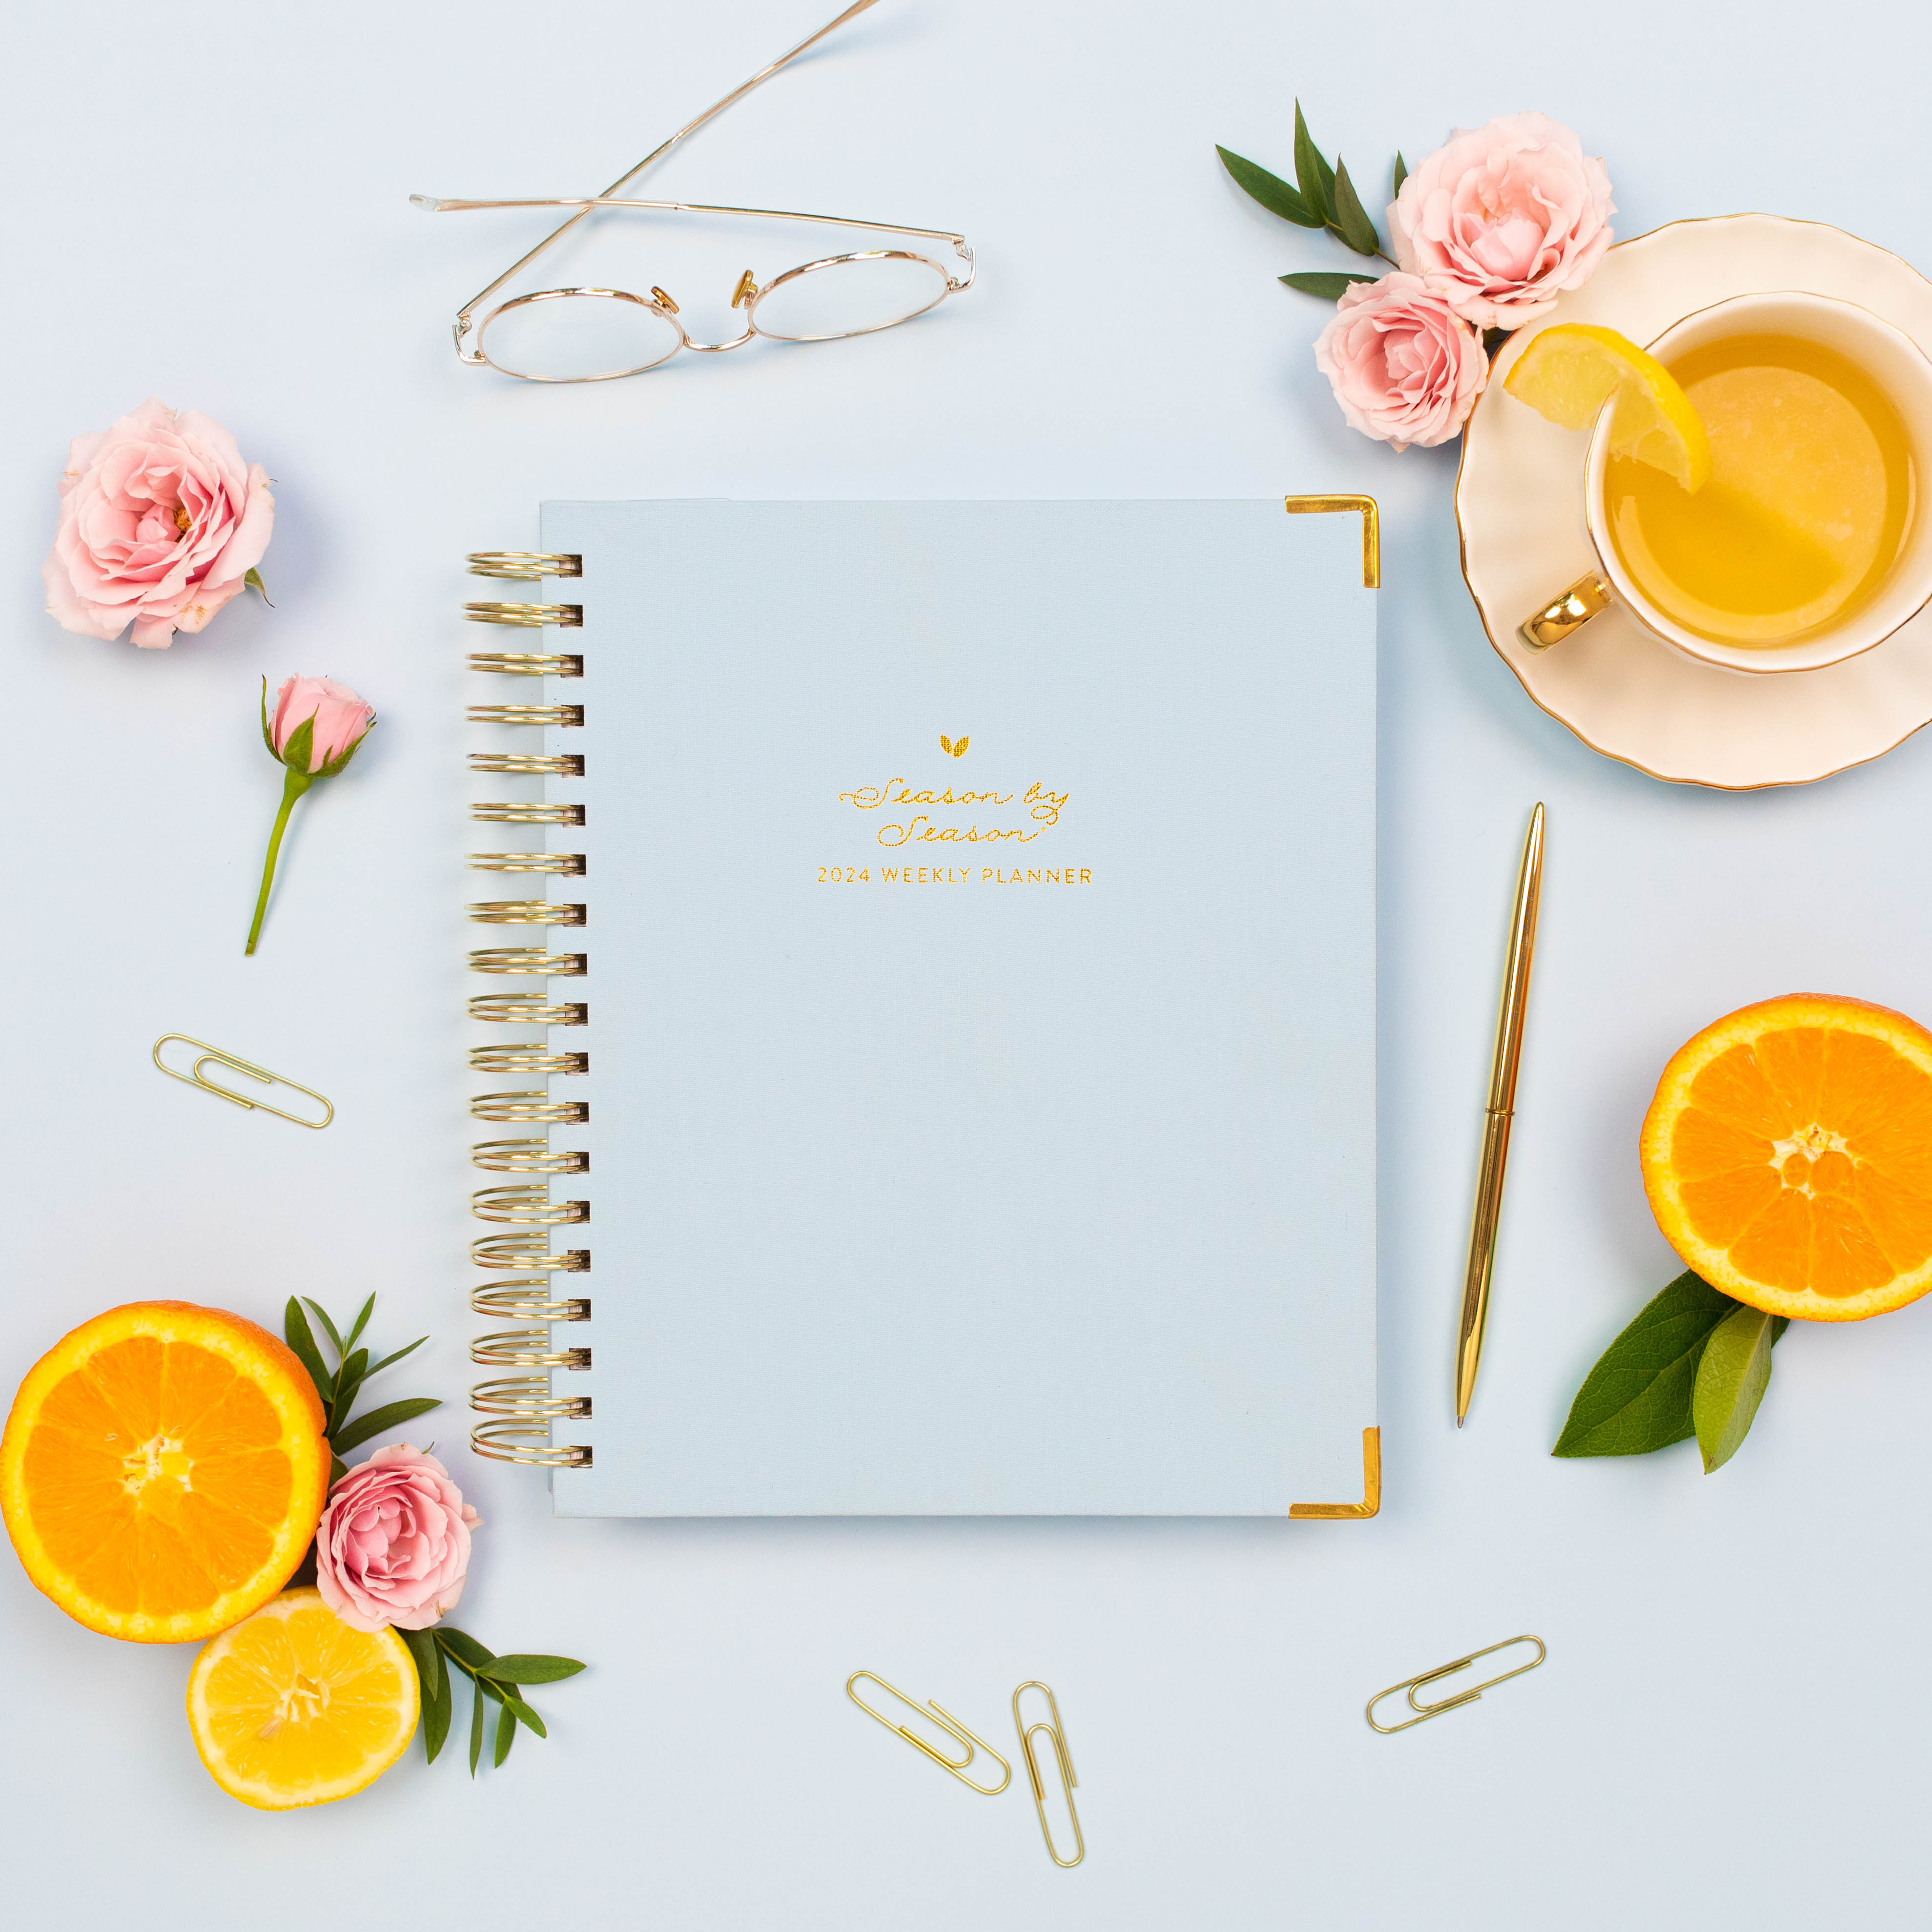 Self Care Club 2024 Muse Annual Daily Planner